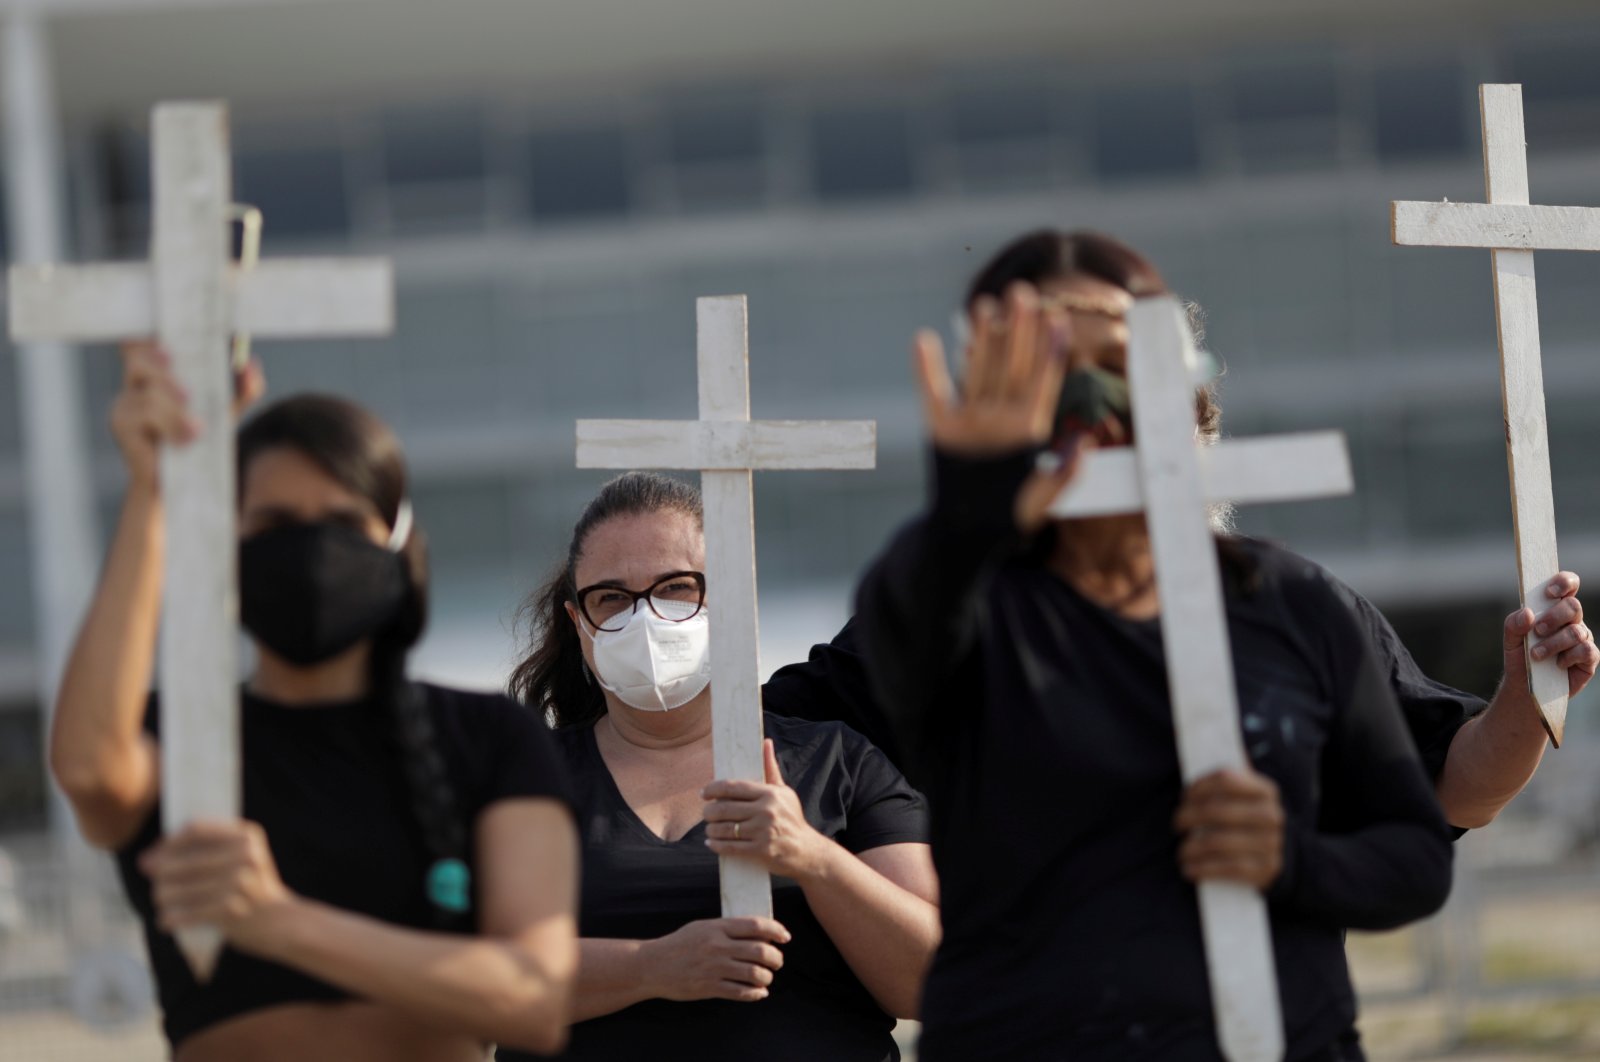 Demonstrators hold crosses during a protest to pay tribute to Brazil's 600,000 COVID-19 deaths and against Brazil's President Jair Bolsonaro's handling of the coronavirus disease pandemic, in Brasilia, Brazil, Oct. 8, 2021. (Reuters Photo)